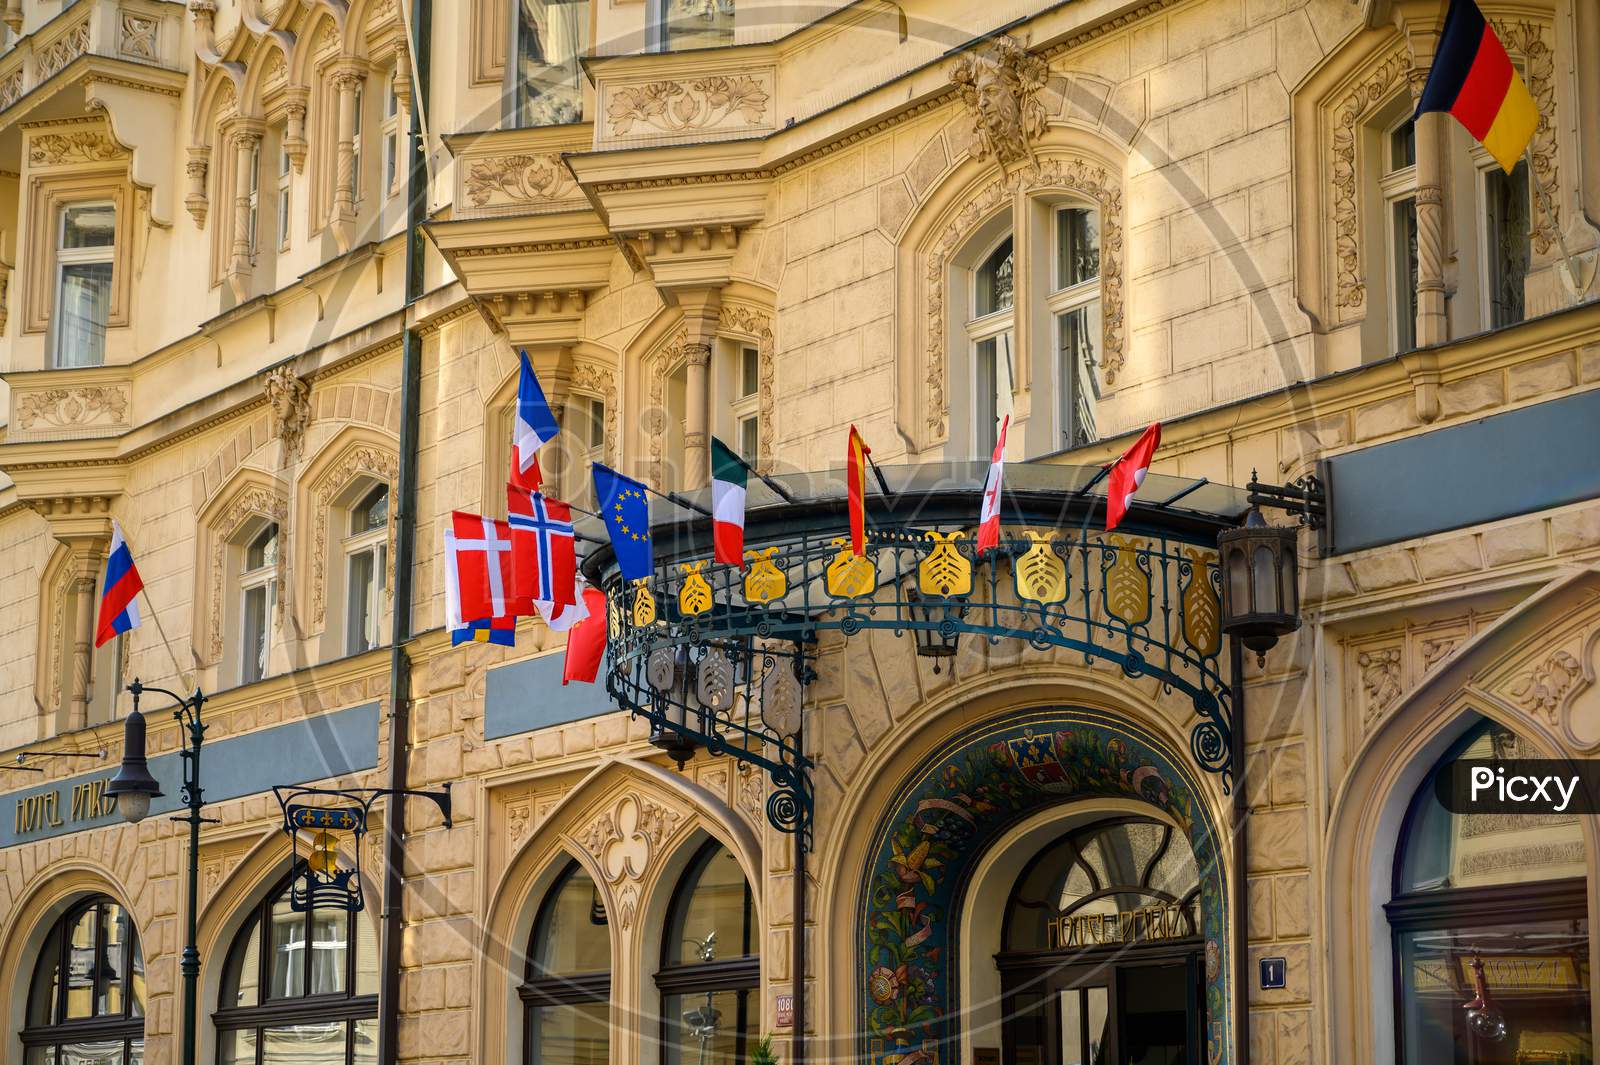 National Flags Above The Entrance To An Old Hotel Building In Prague, Czech Republic